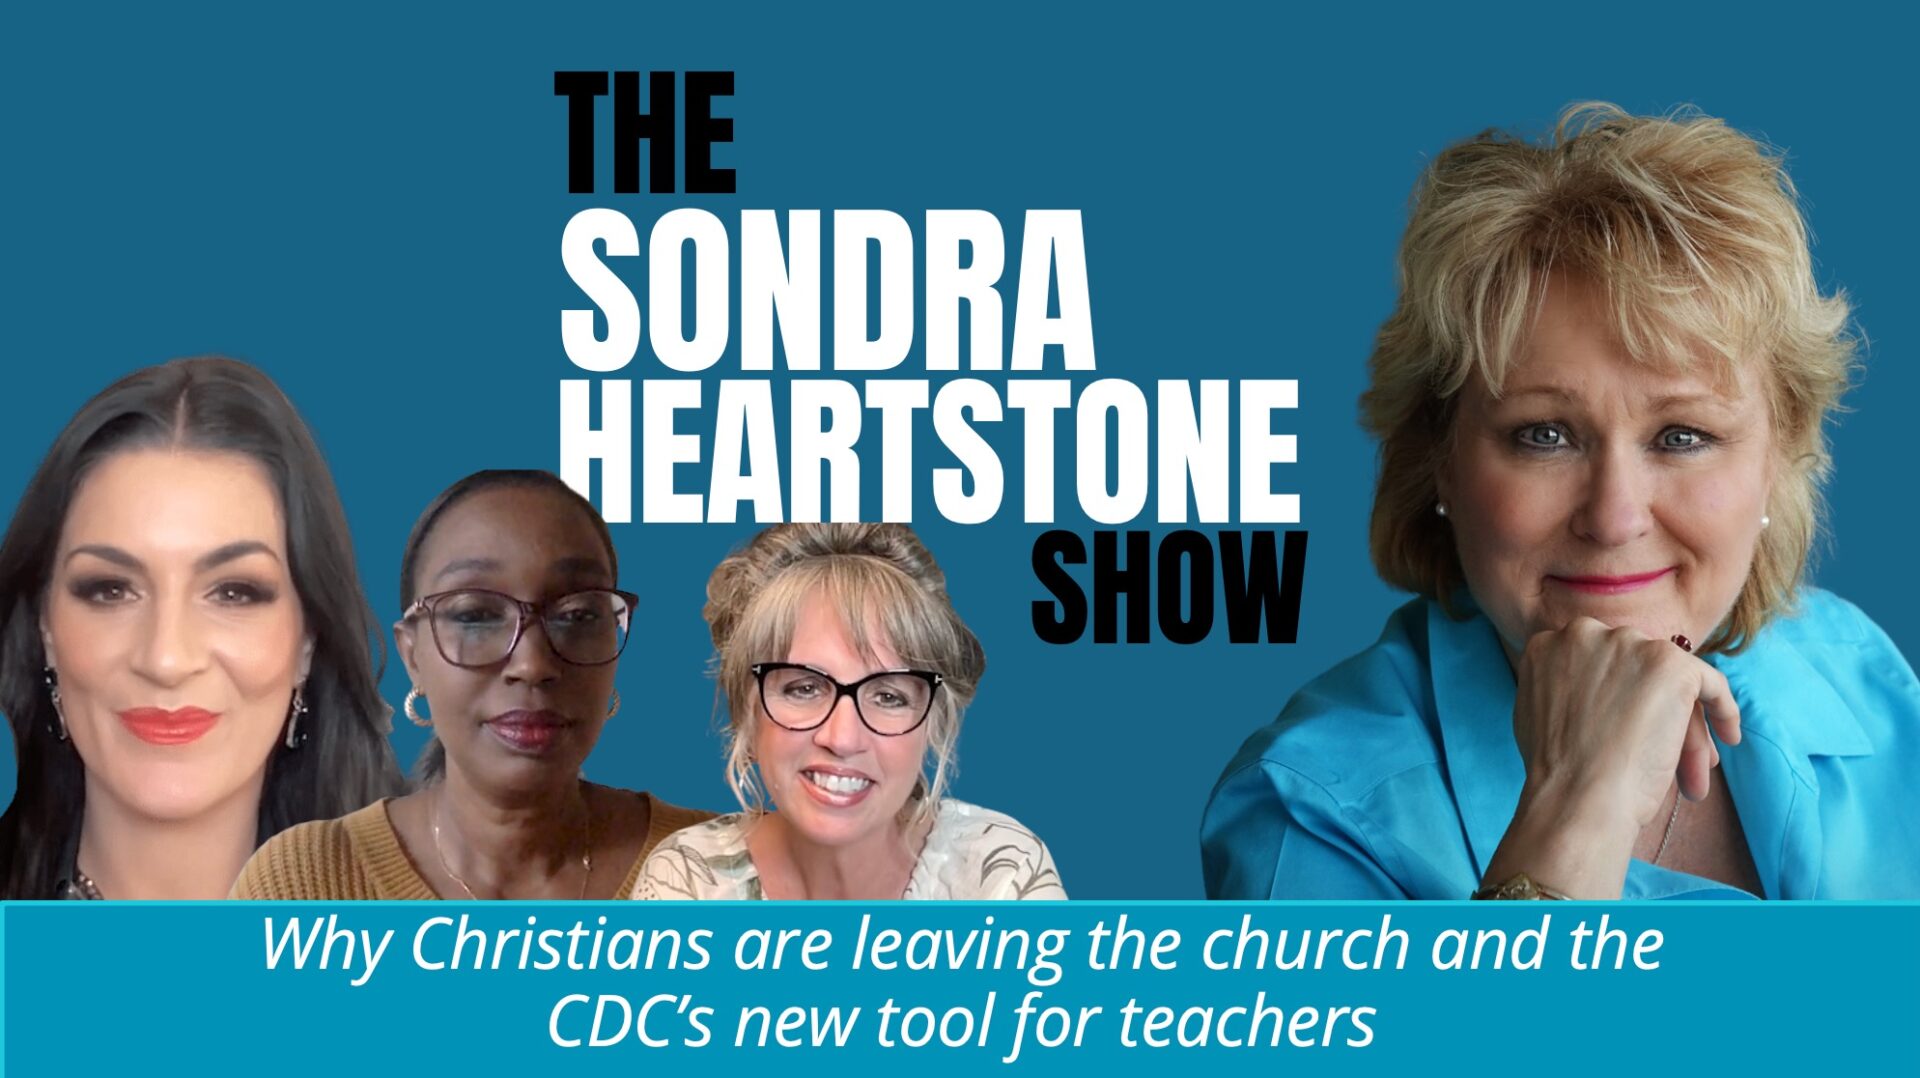 Why Christians are leaving the church and the CDC's new tool for teachers